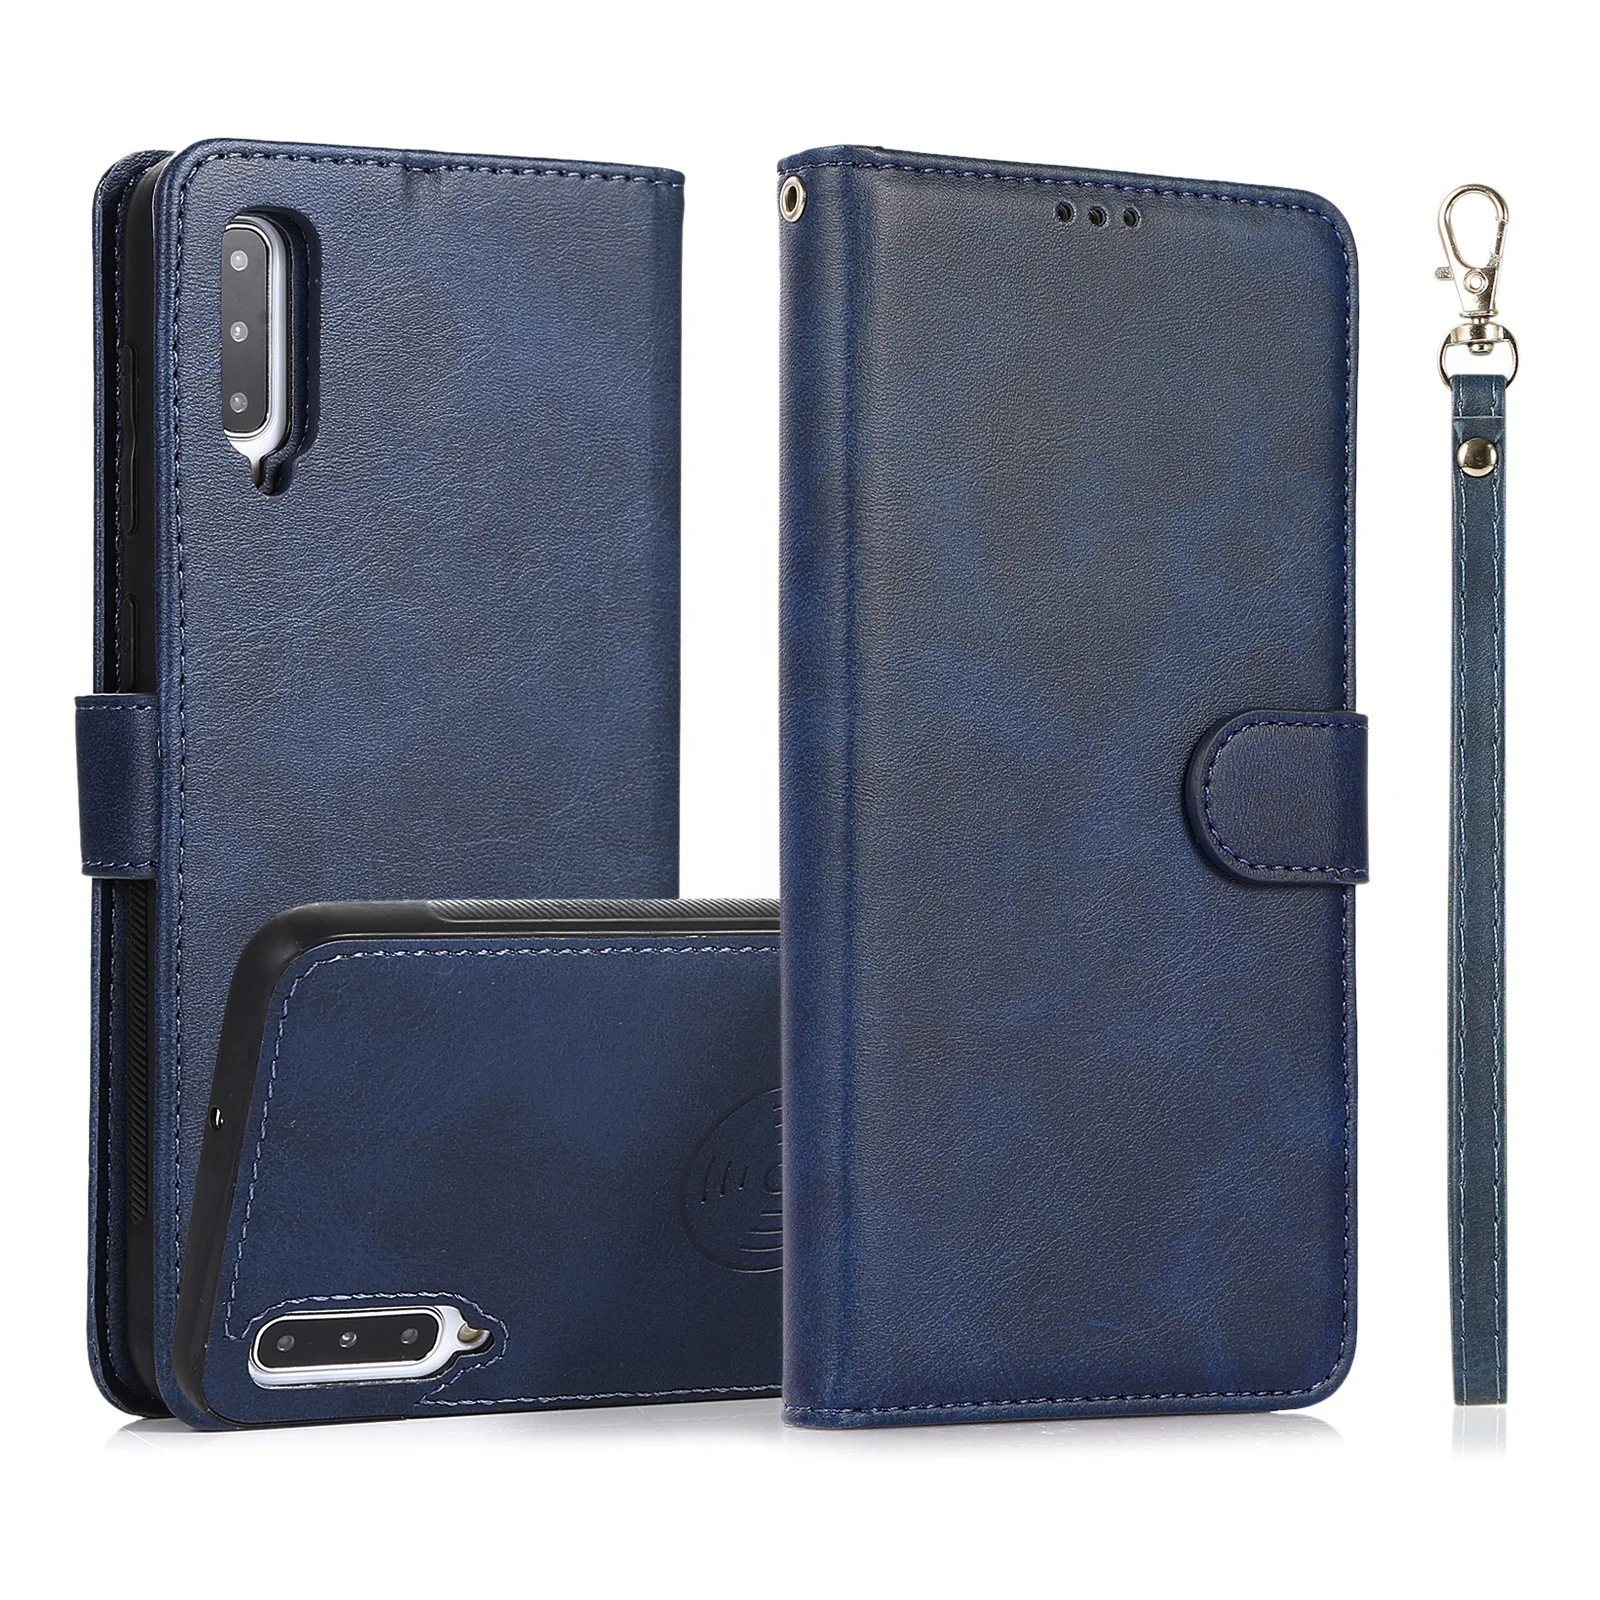 

Luxury 2 IN 1 Skin Leather Flip Book Cover Magnetic Wallet Case For Samsung A11 A21 A41 A51 A71 A81 A91 M11 A21S A50 A70